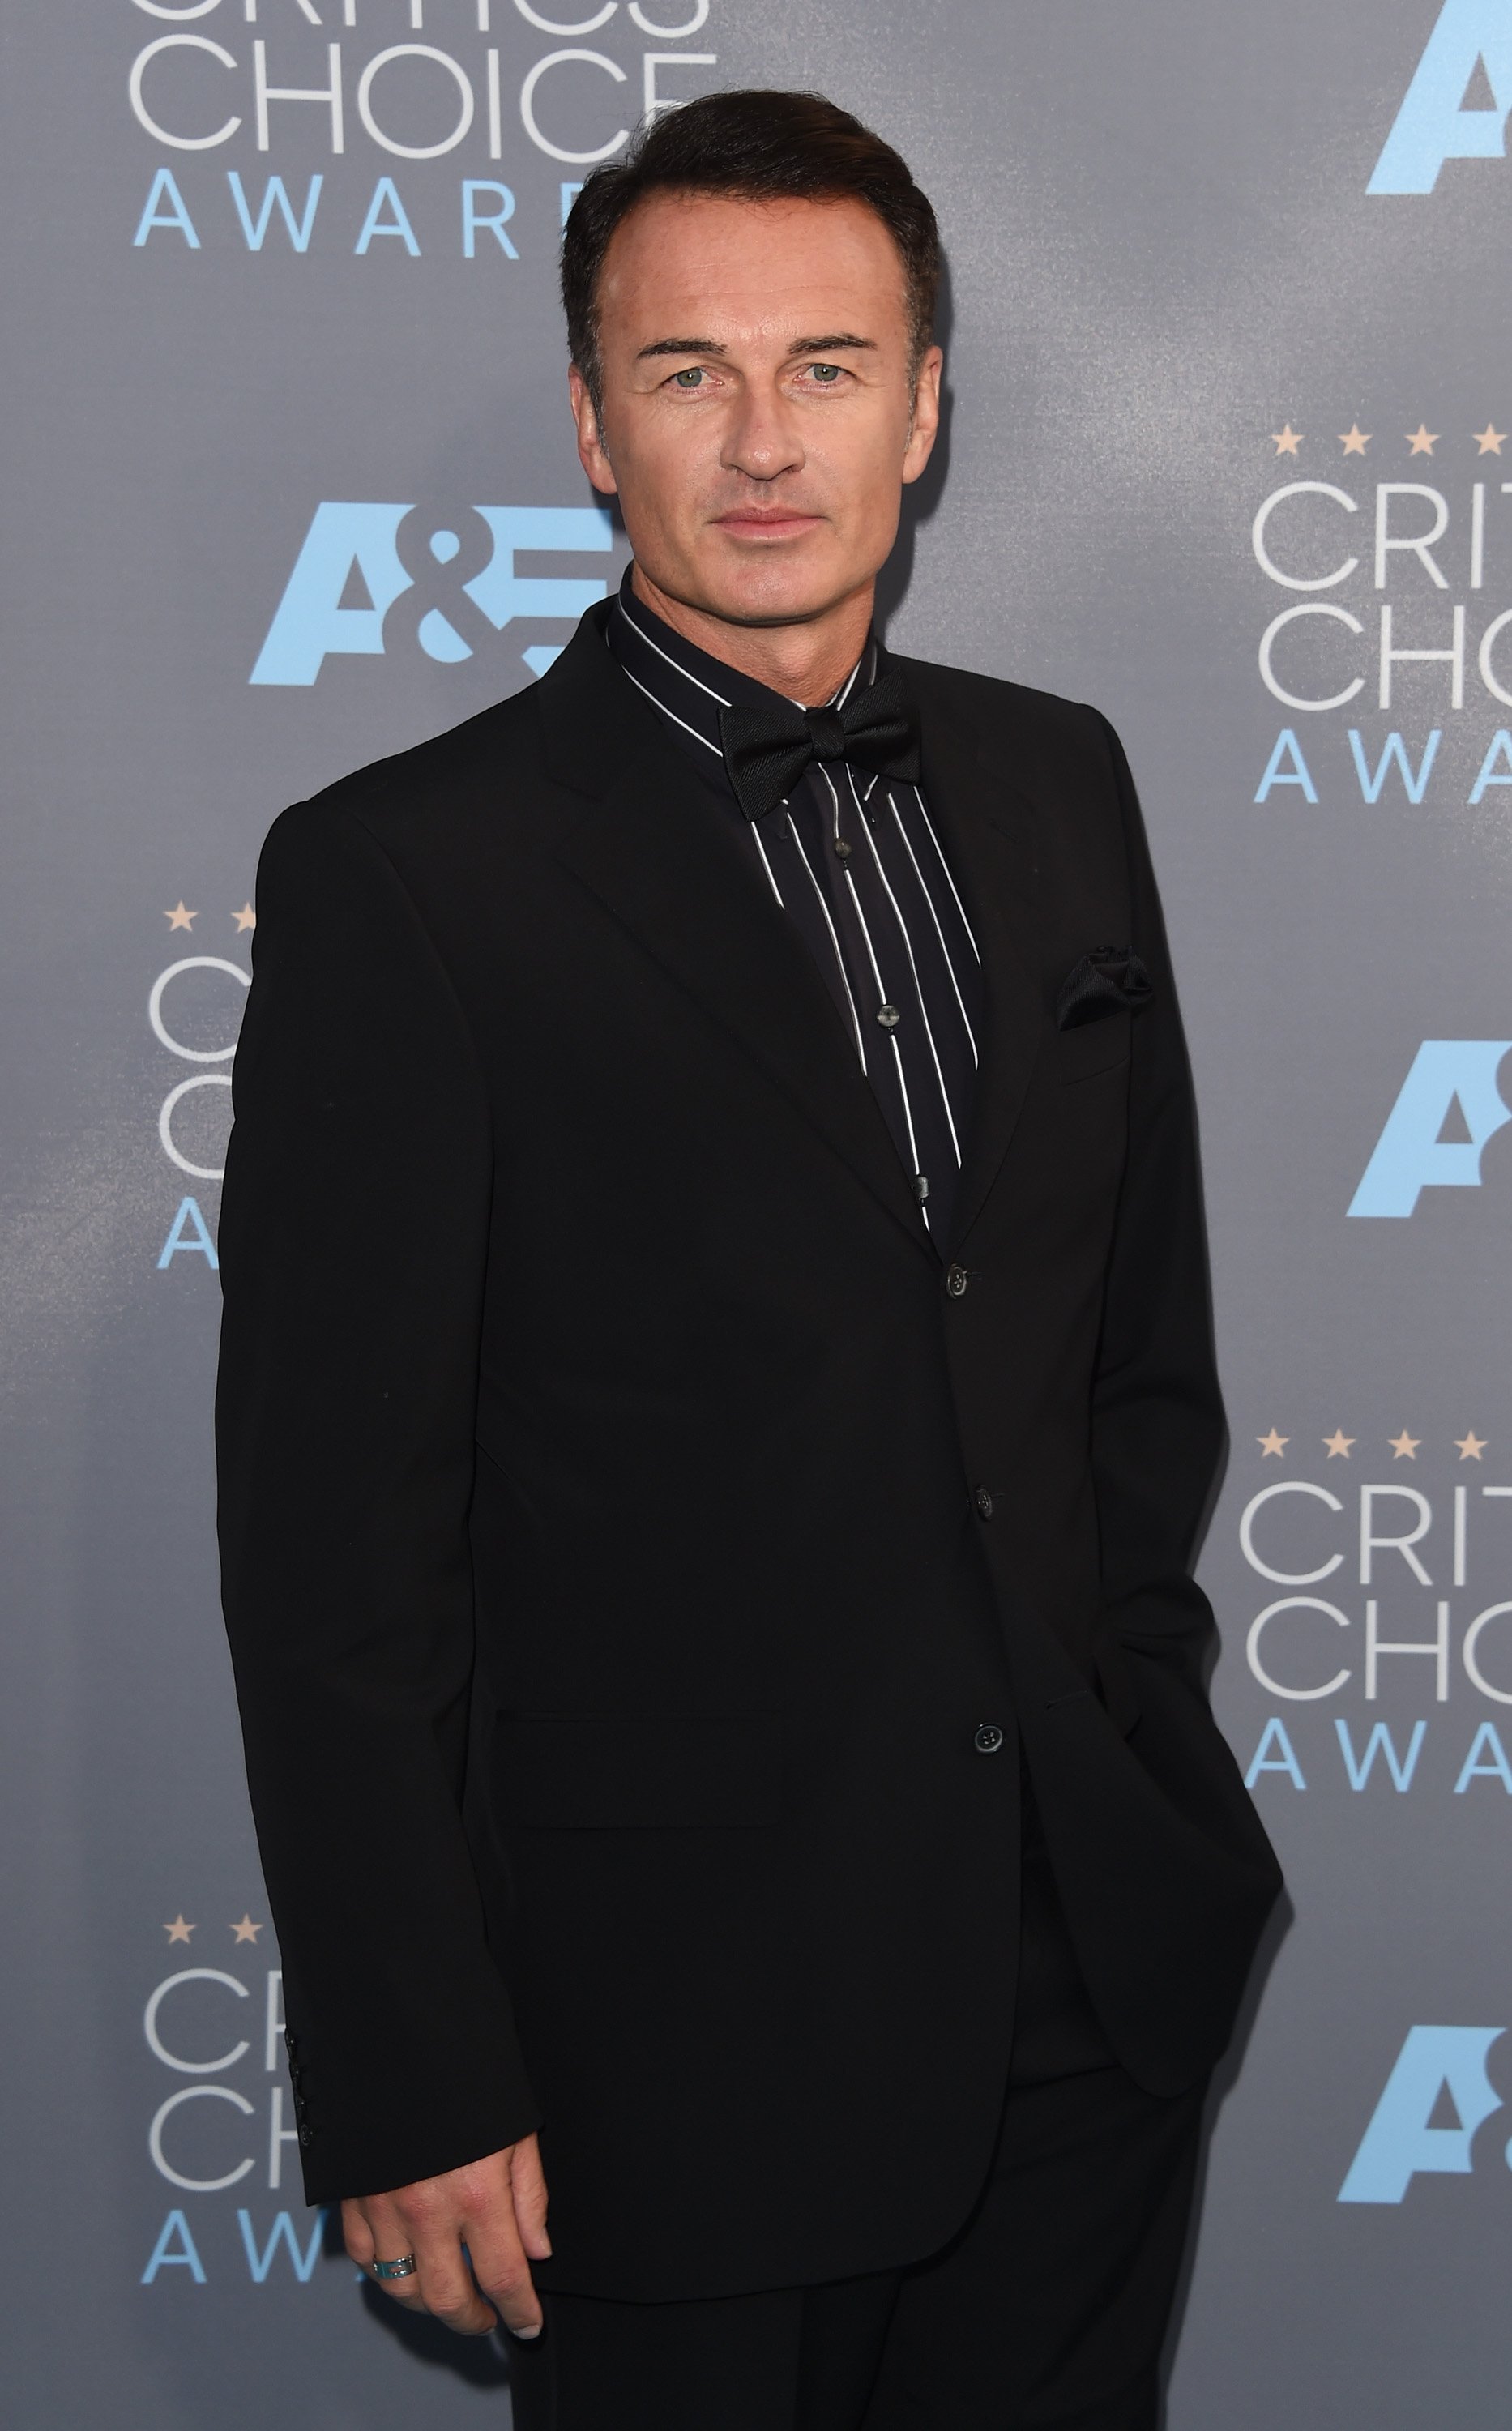 Julian McMahon attends the 21st Annual Critics' Choice Awards at Barker Hangar on January 17, 2016, in Santa Monica, California. | Source: Getty Images.